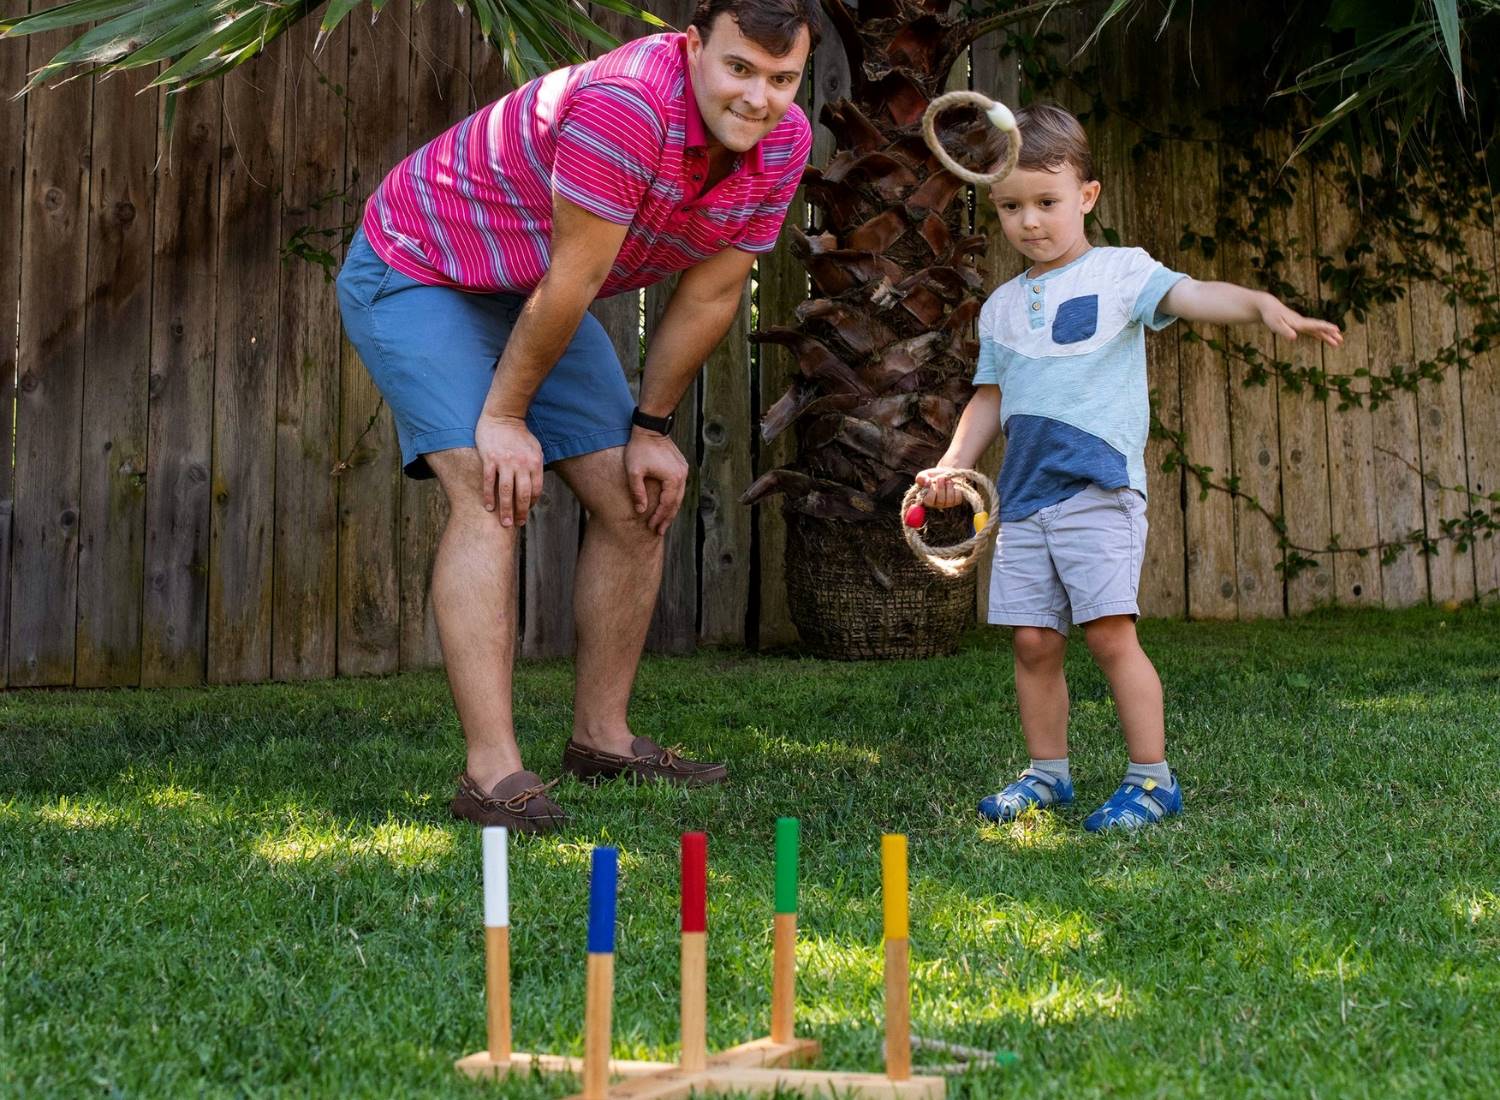 DIY ring toss game (perfect for garden parties)